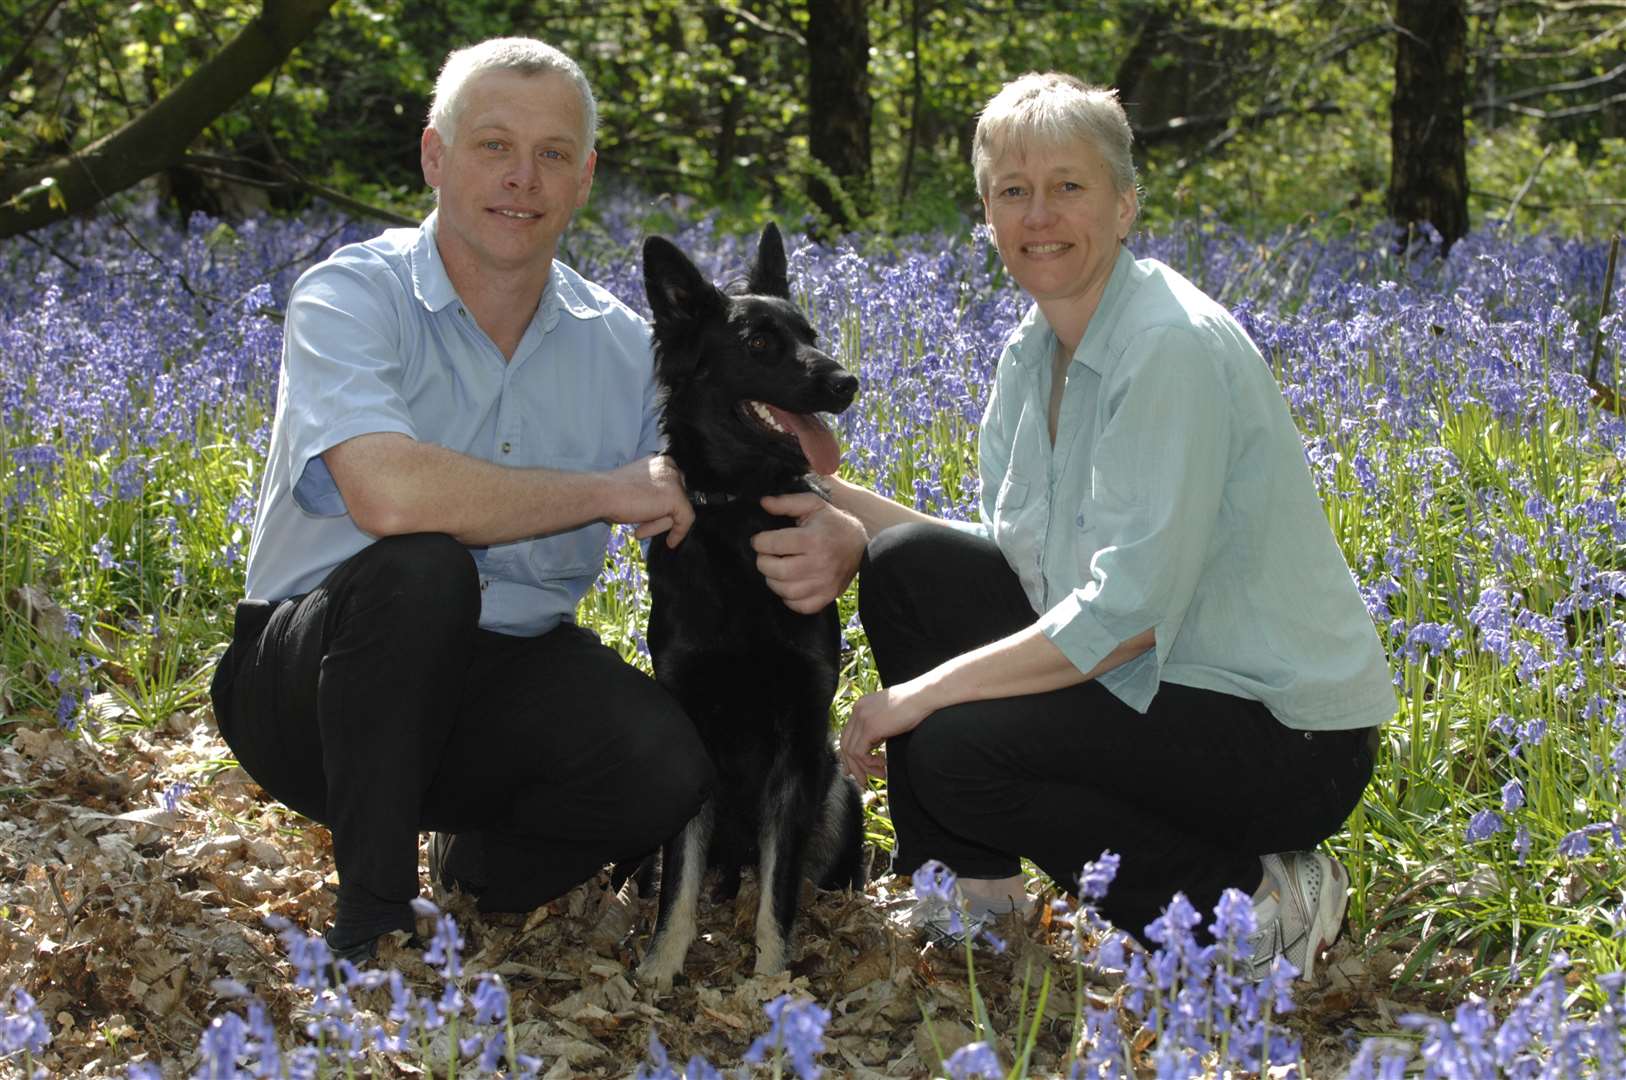 Cllr Tom and Janetta Sams with their dog Zeta at their Harrietsham home